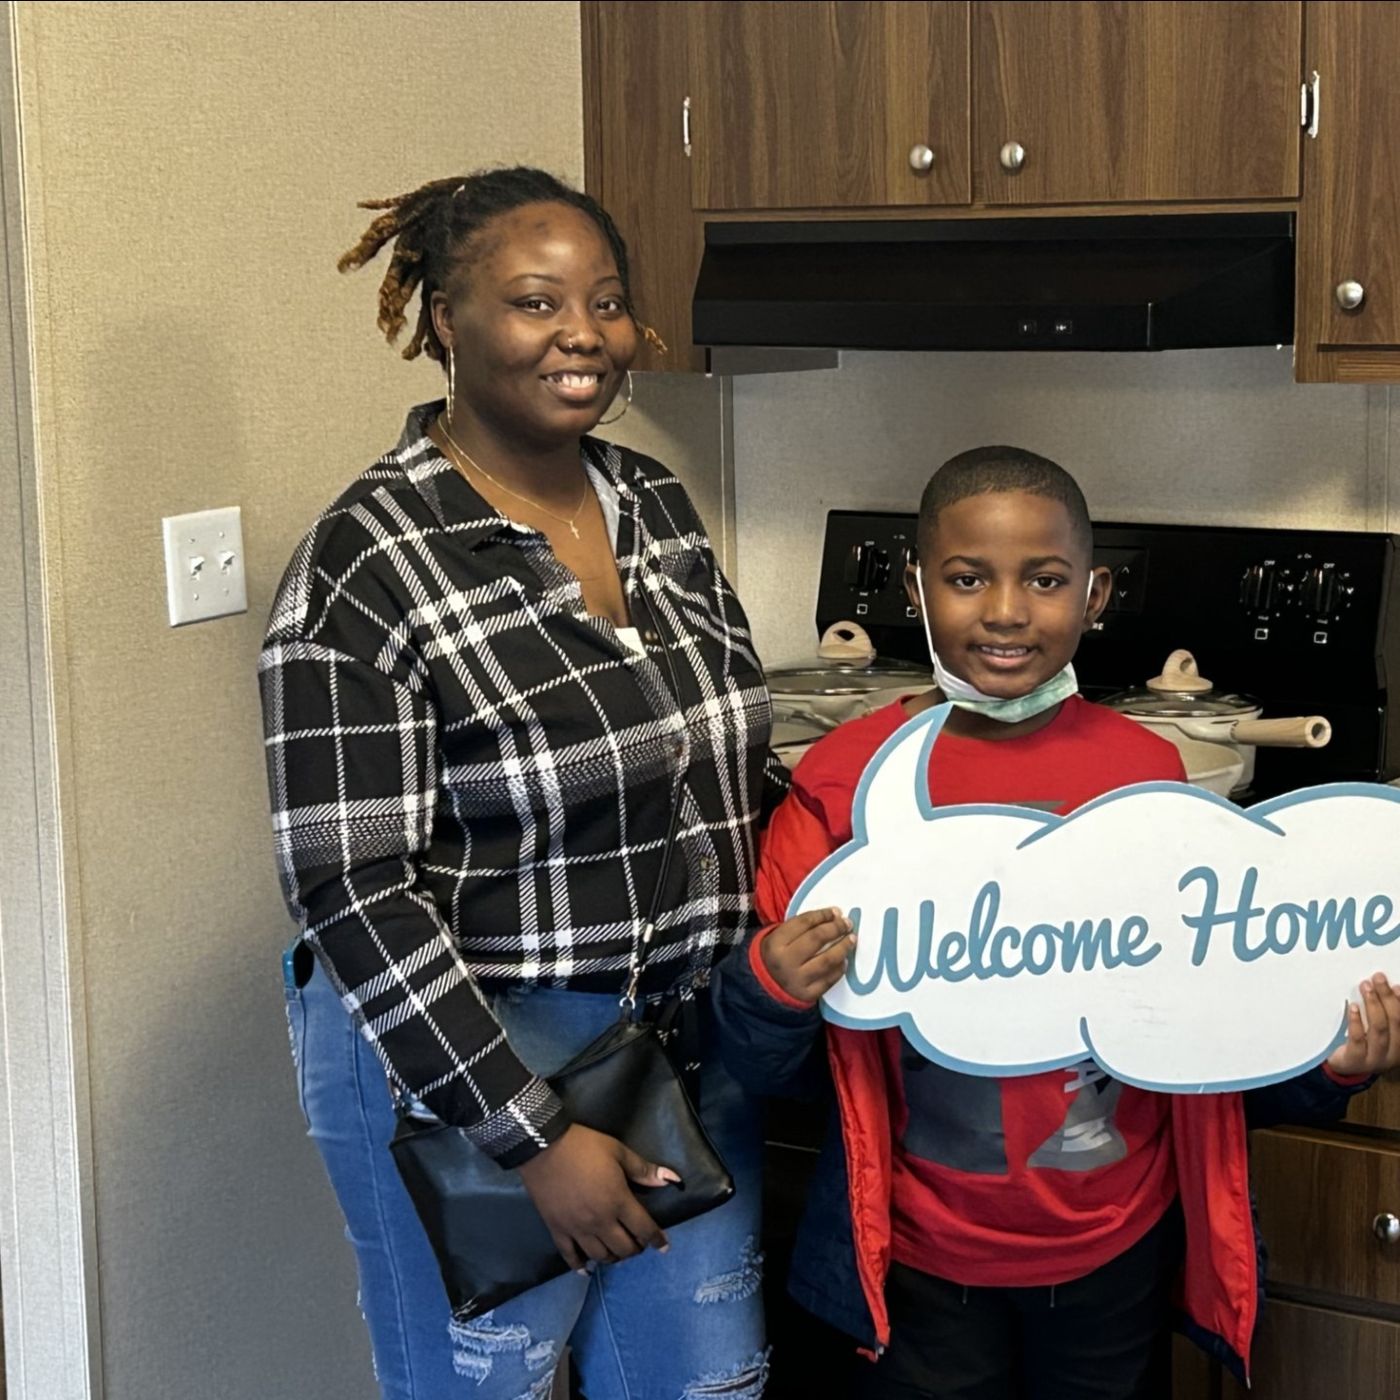 SHANIQUE M. welcome home image